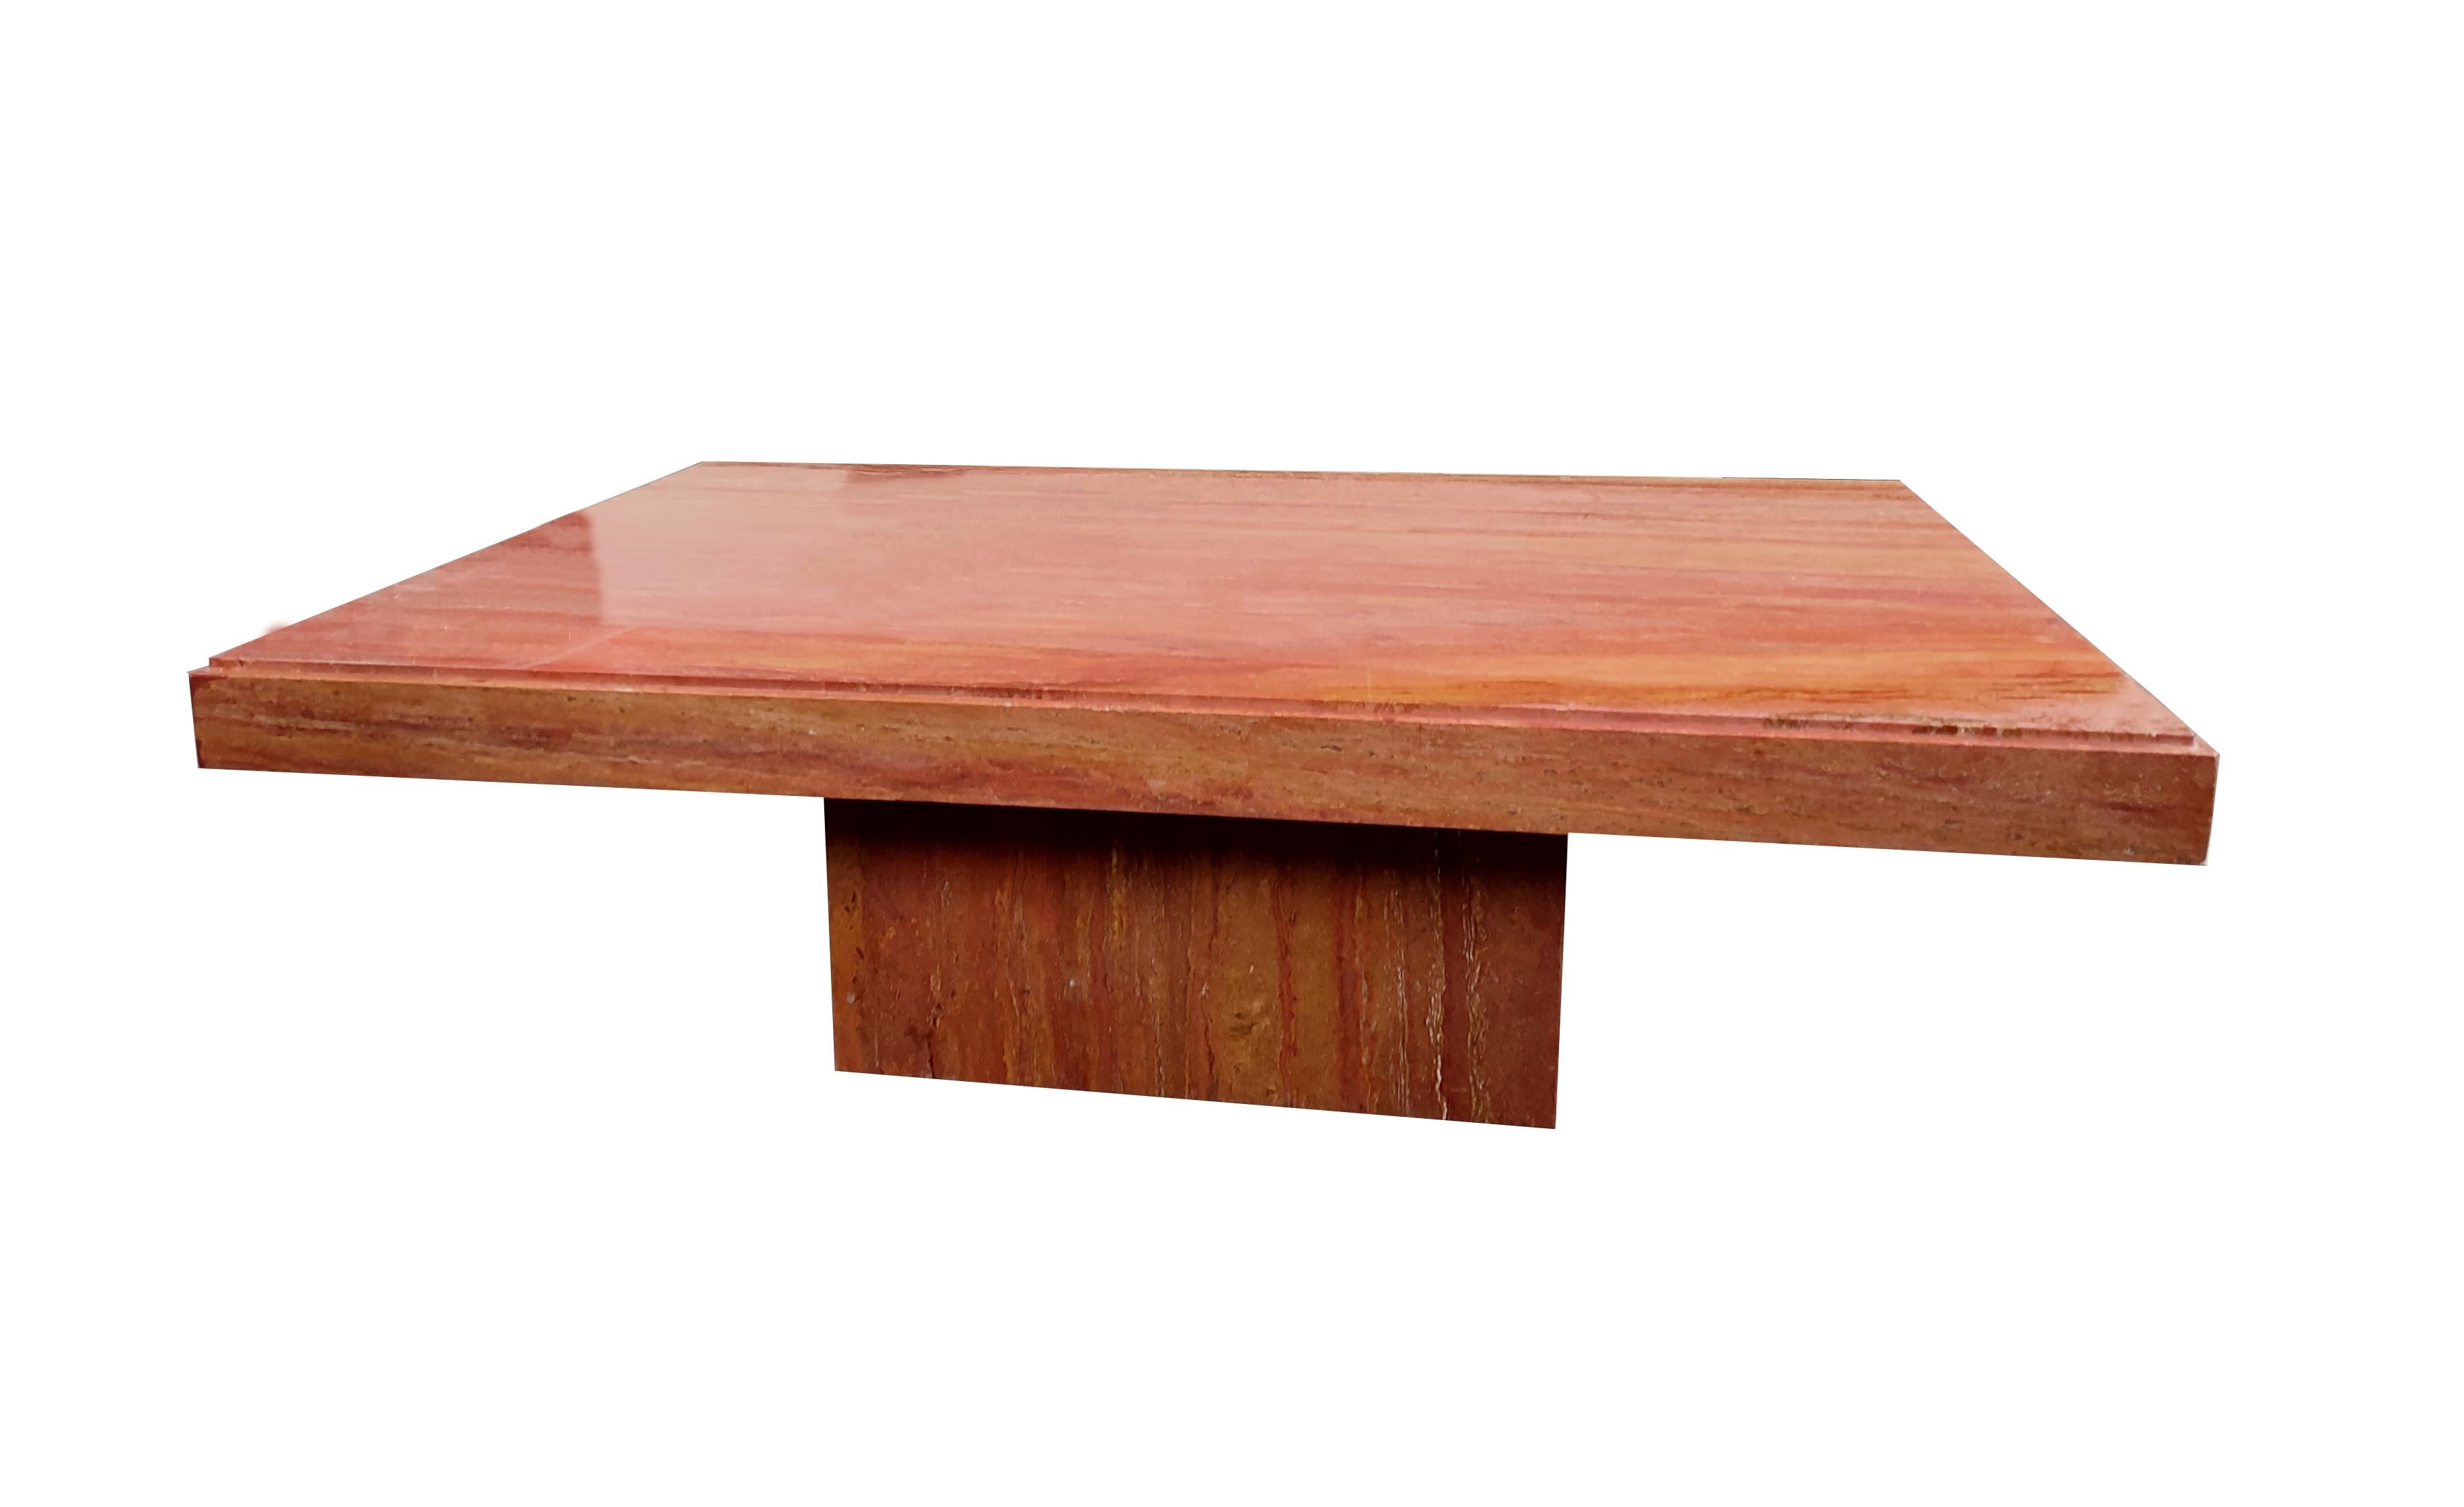 Teka Iranian Red Travertine Marble Mid Century 80’s Original Coffee Table Spain
The Teka coffee table is an original piece from the 80's, produced in Meddel's facilities in Segovia, Spain. It is a table with an Iranian red travertine marble top, a